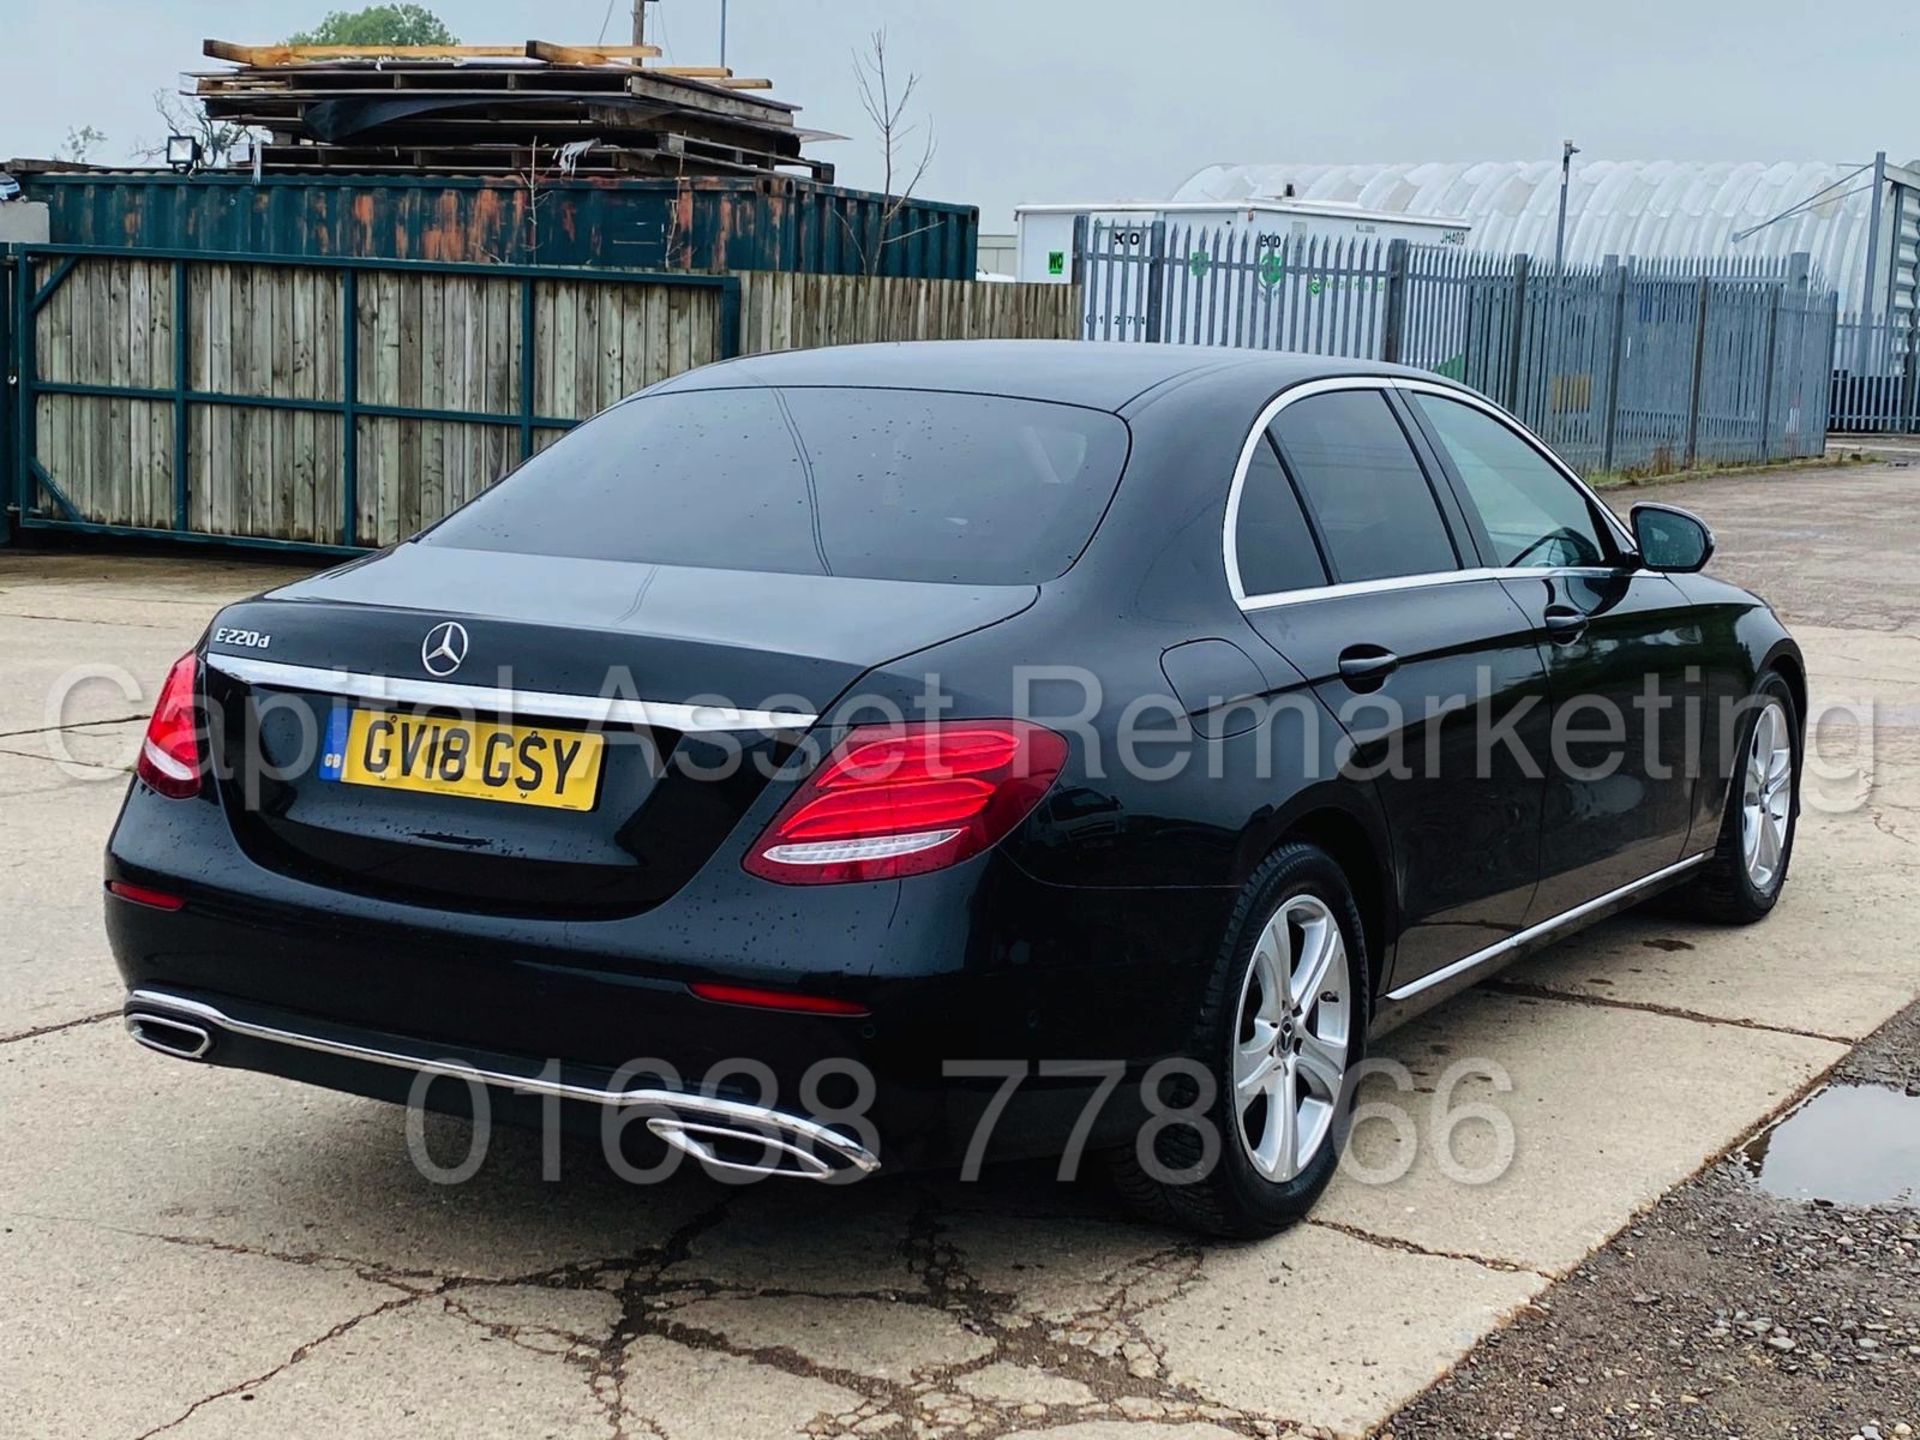 (ON SALE) MERCEDES-BENZ E220D *SALOON* (2018 - NEW MODEL) '9-G TRONIC AUTO - LEATHER - SAT NAV' - Image 12 of 52